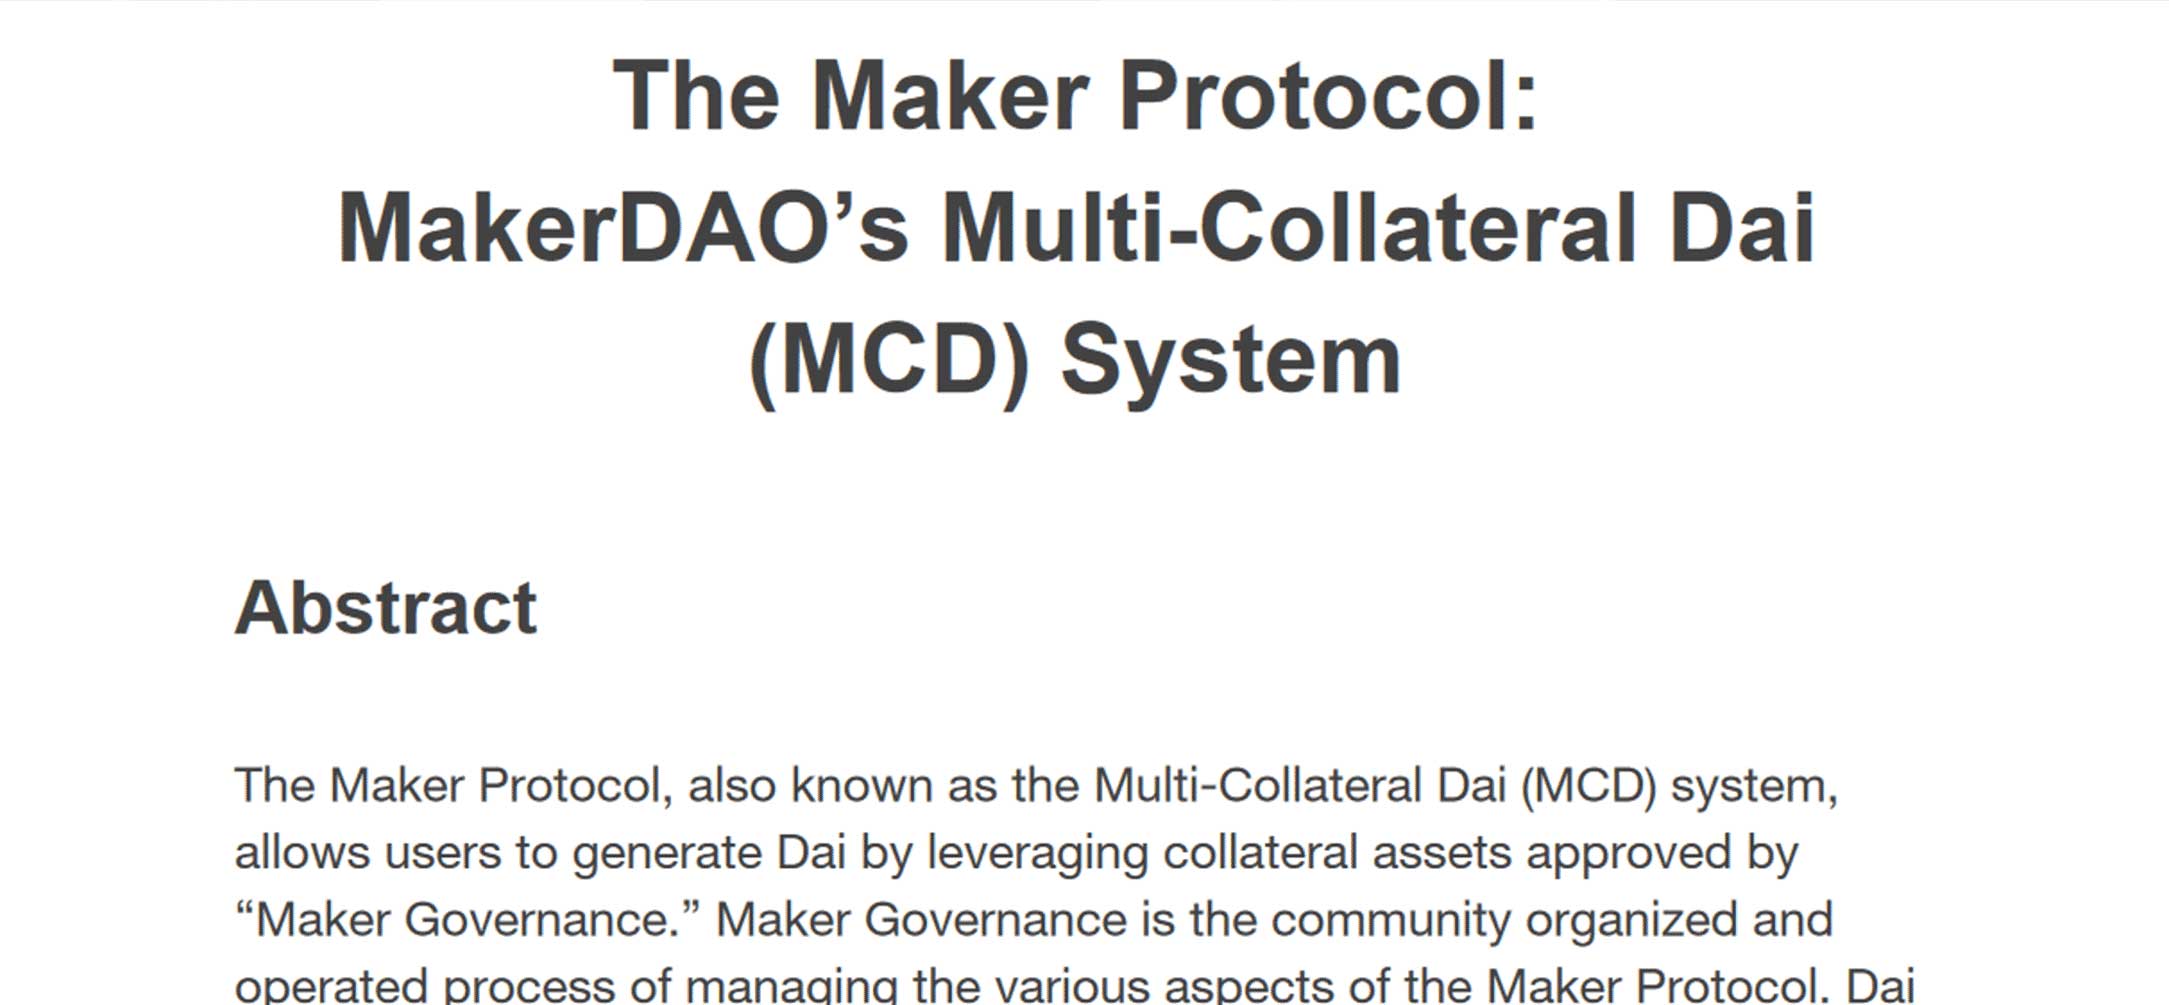 The Maker Protocol: MakerDAO’s Multi-Collateral Dai (MCD) System